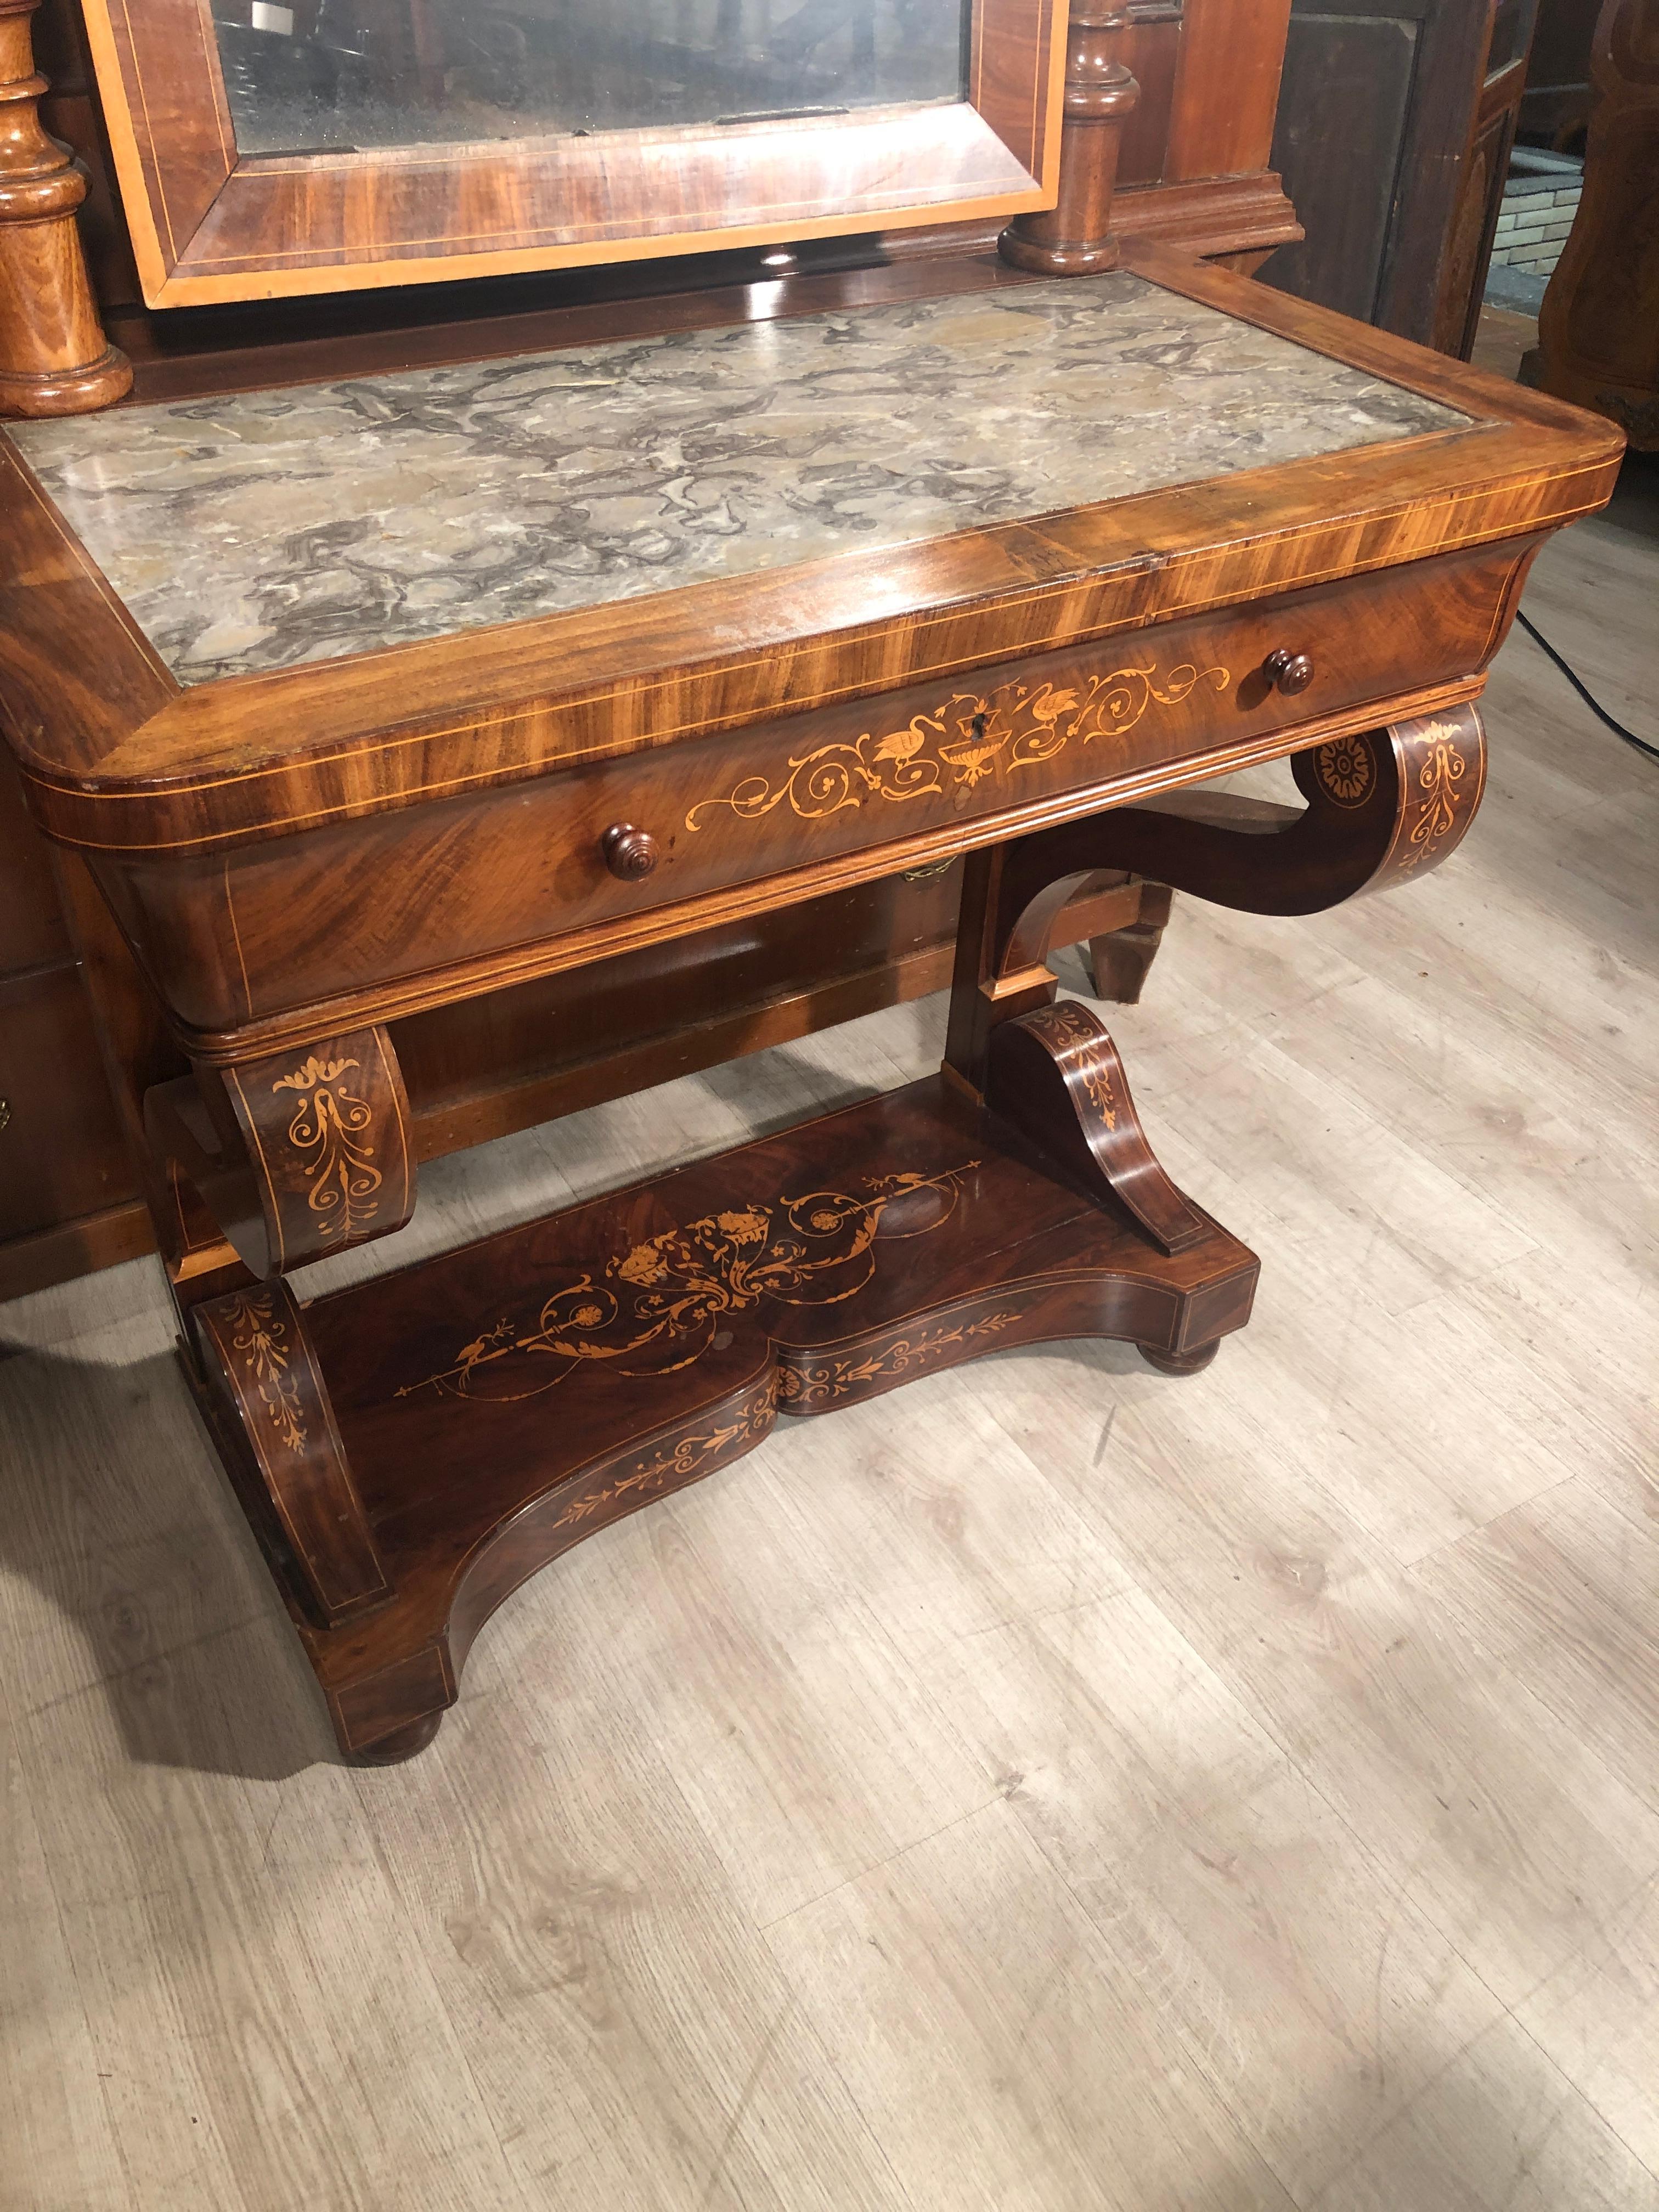 Carlo X console, France, finely inlaid with floral motifs, classics from the Charles X period, in rosewood. Breccia from aleppo. In excellent condition but needs restoration. Completely original.